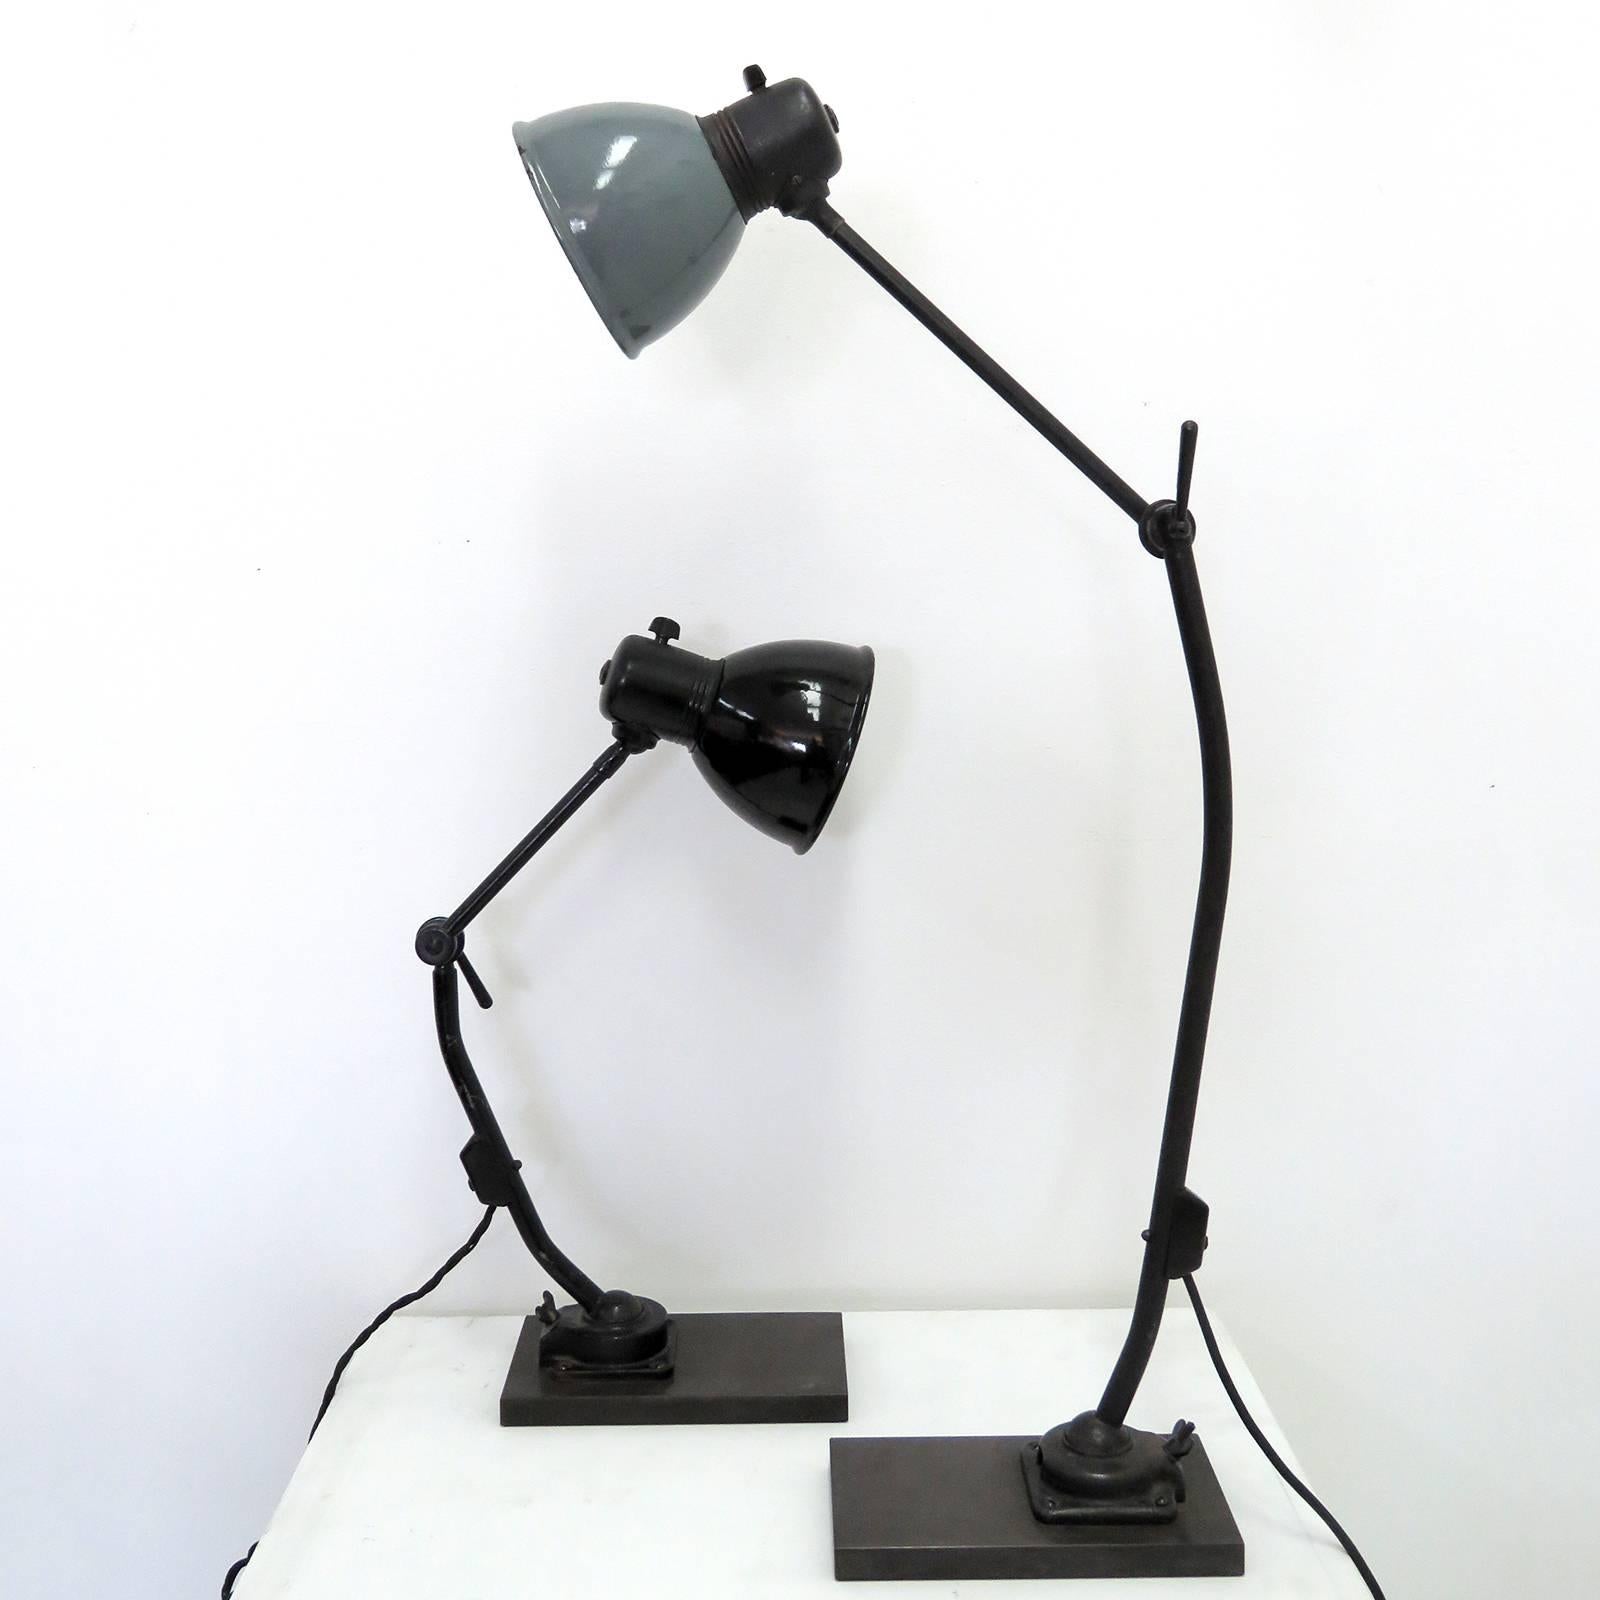 Striking 1930s task lamps by Marianne Brandt for Kandem (1934-1939), with custom solid steel bases, can be used as wall or table lamps, both have a ball joint at the original base and head, as well as a rotational joint in the center. No.802PL